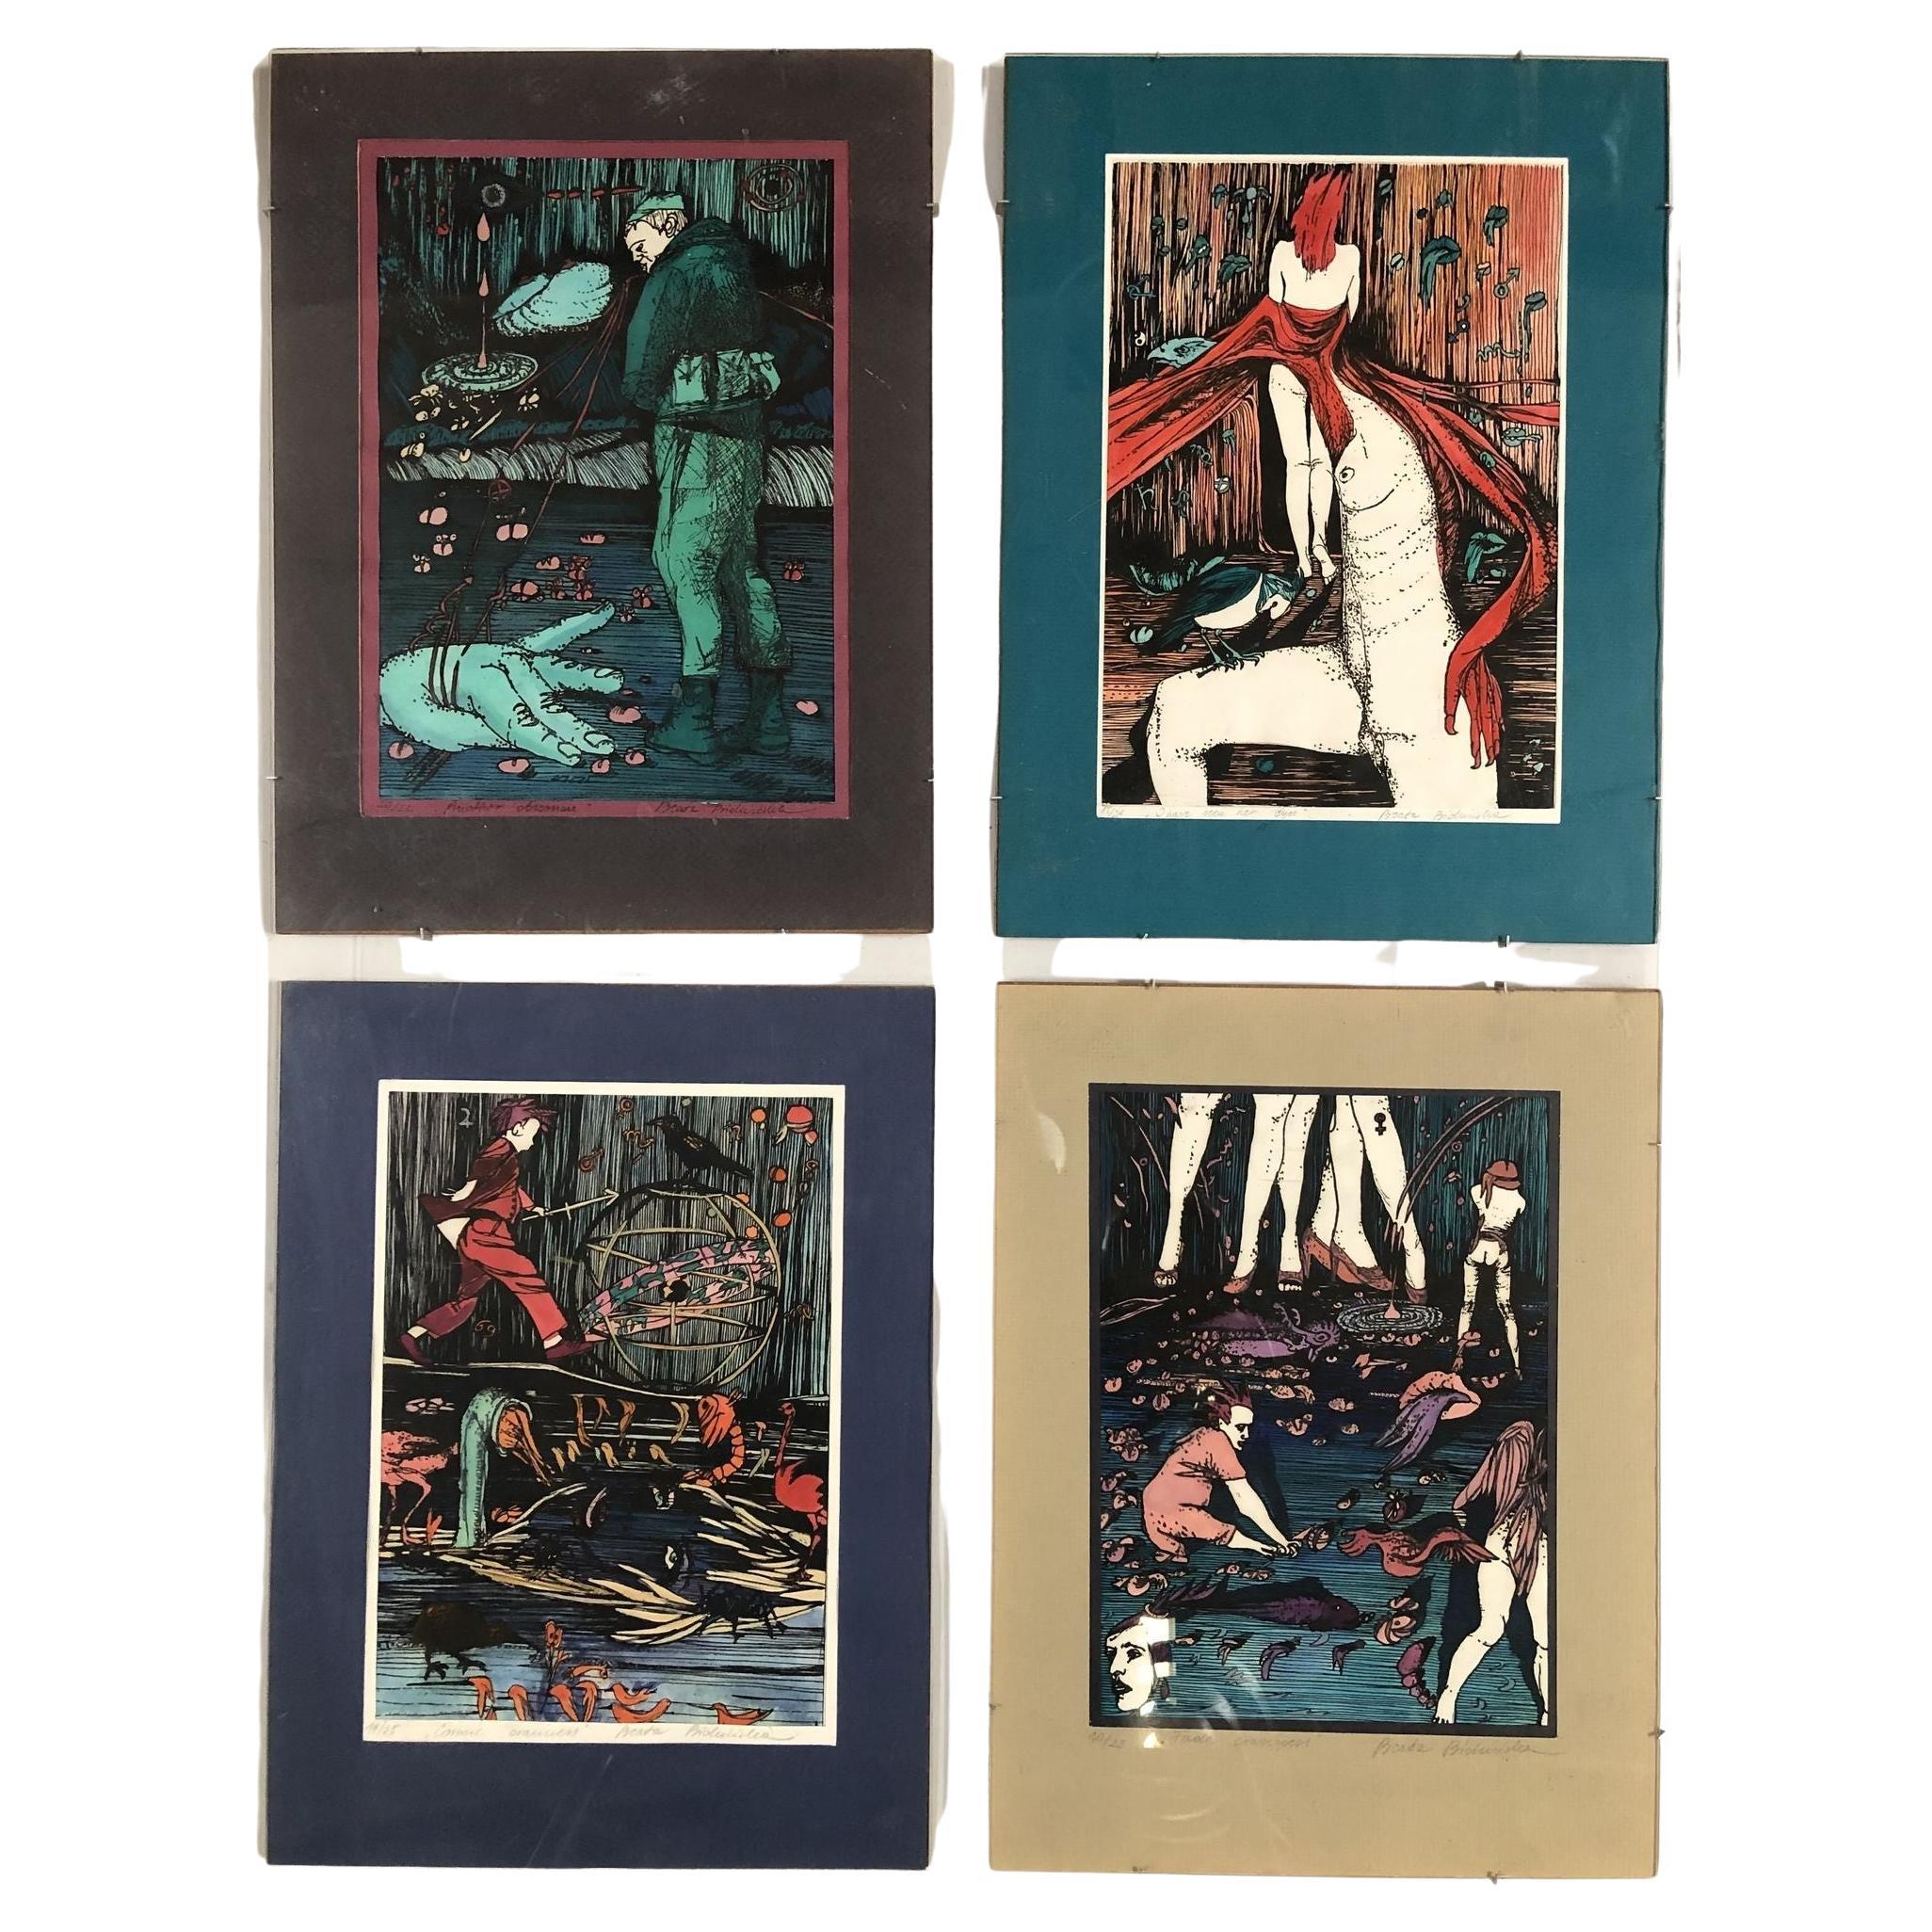 Hand-colored Abstract Block Prints in acrylic Frame by Beato P. Set of 4 For Sale